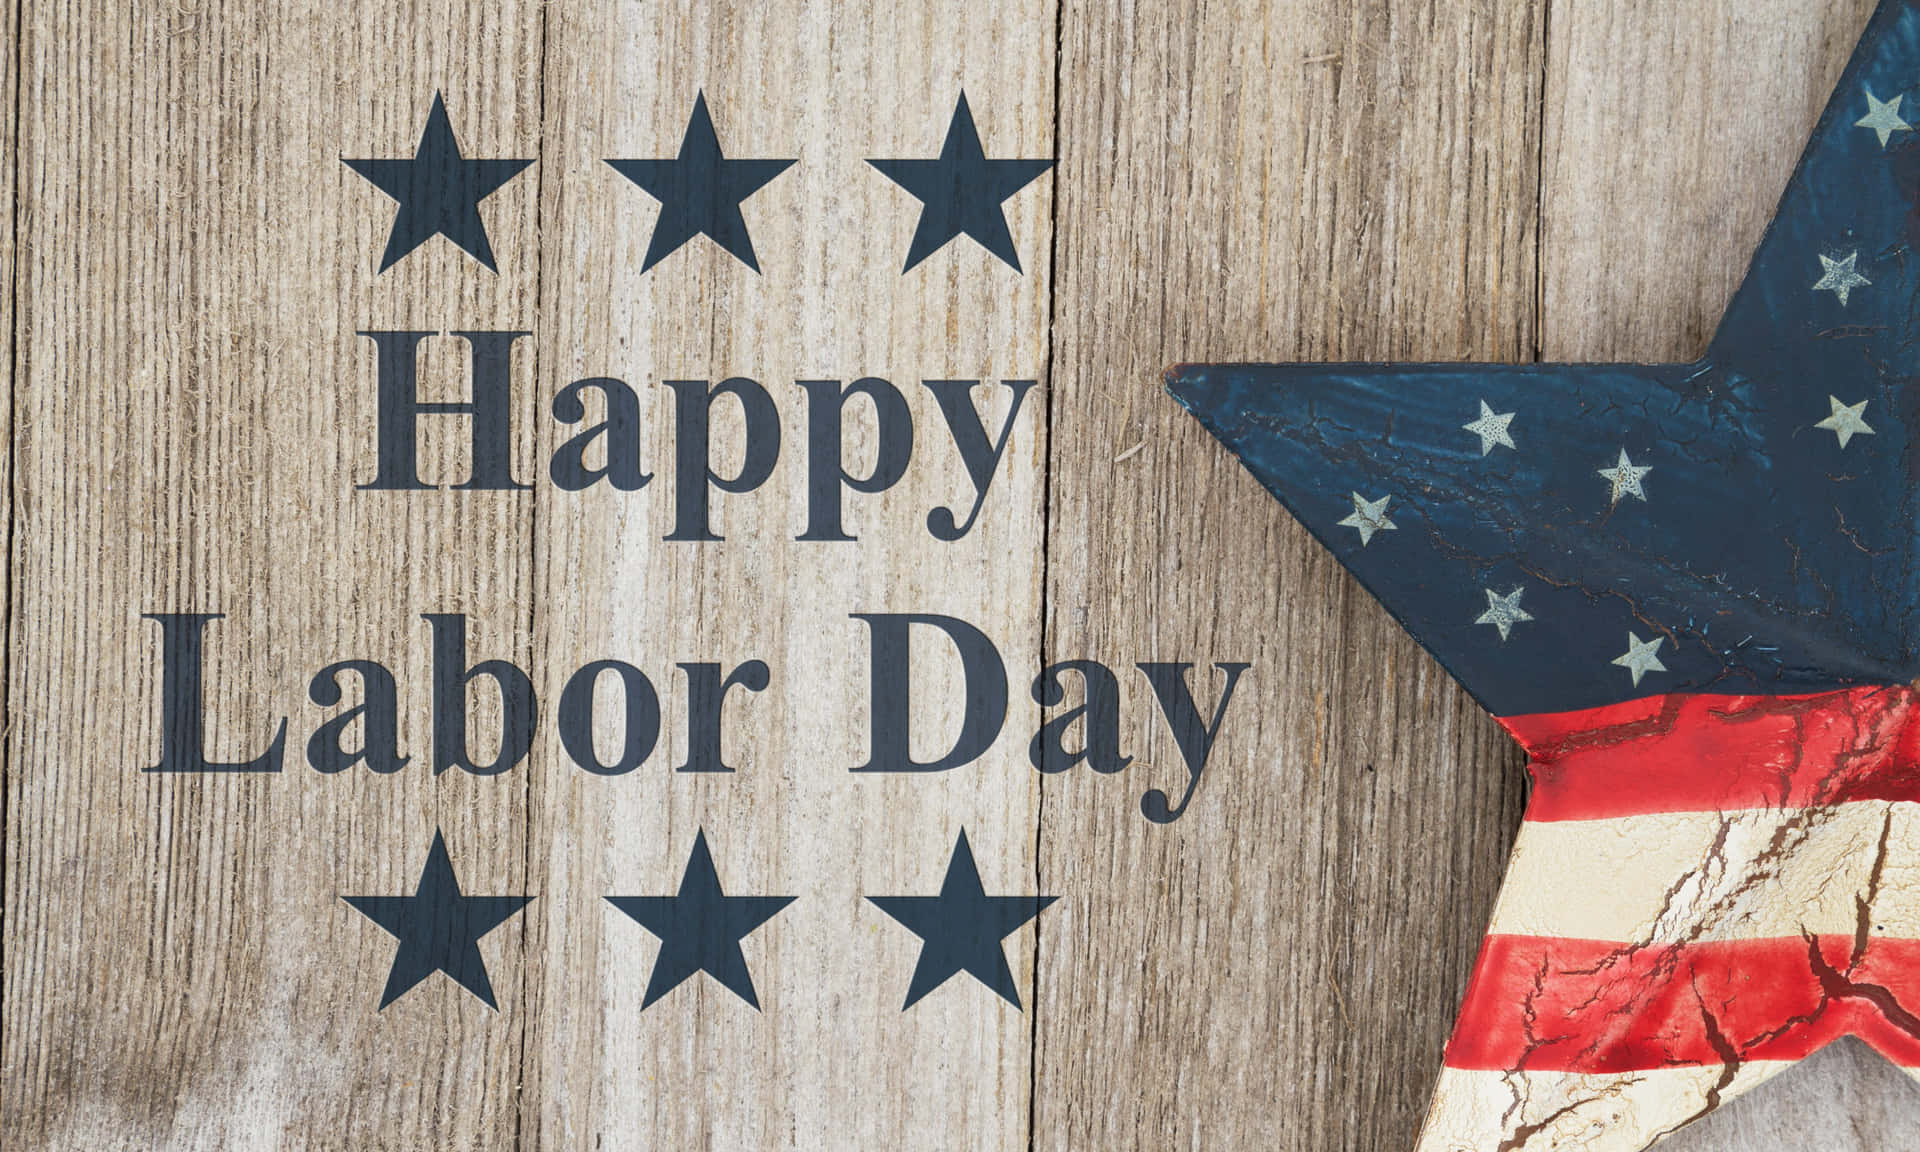 Celebrating the hard work of all past and present laborers this Labor Day